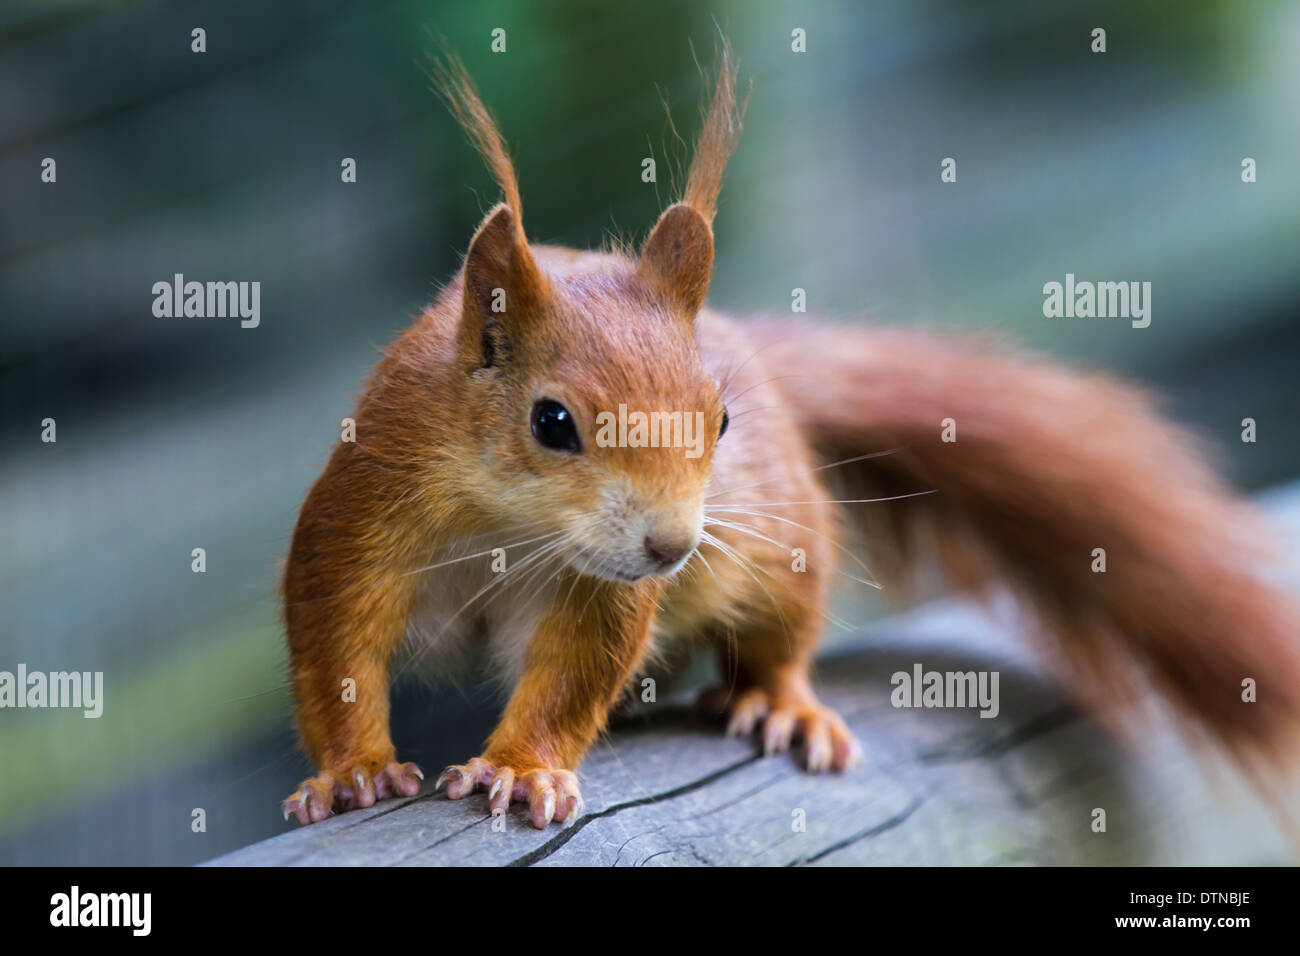 British Red Squirrel on wooden post Stock Photo